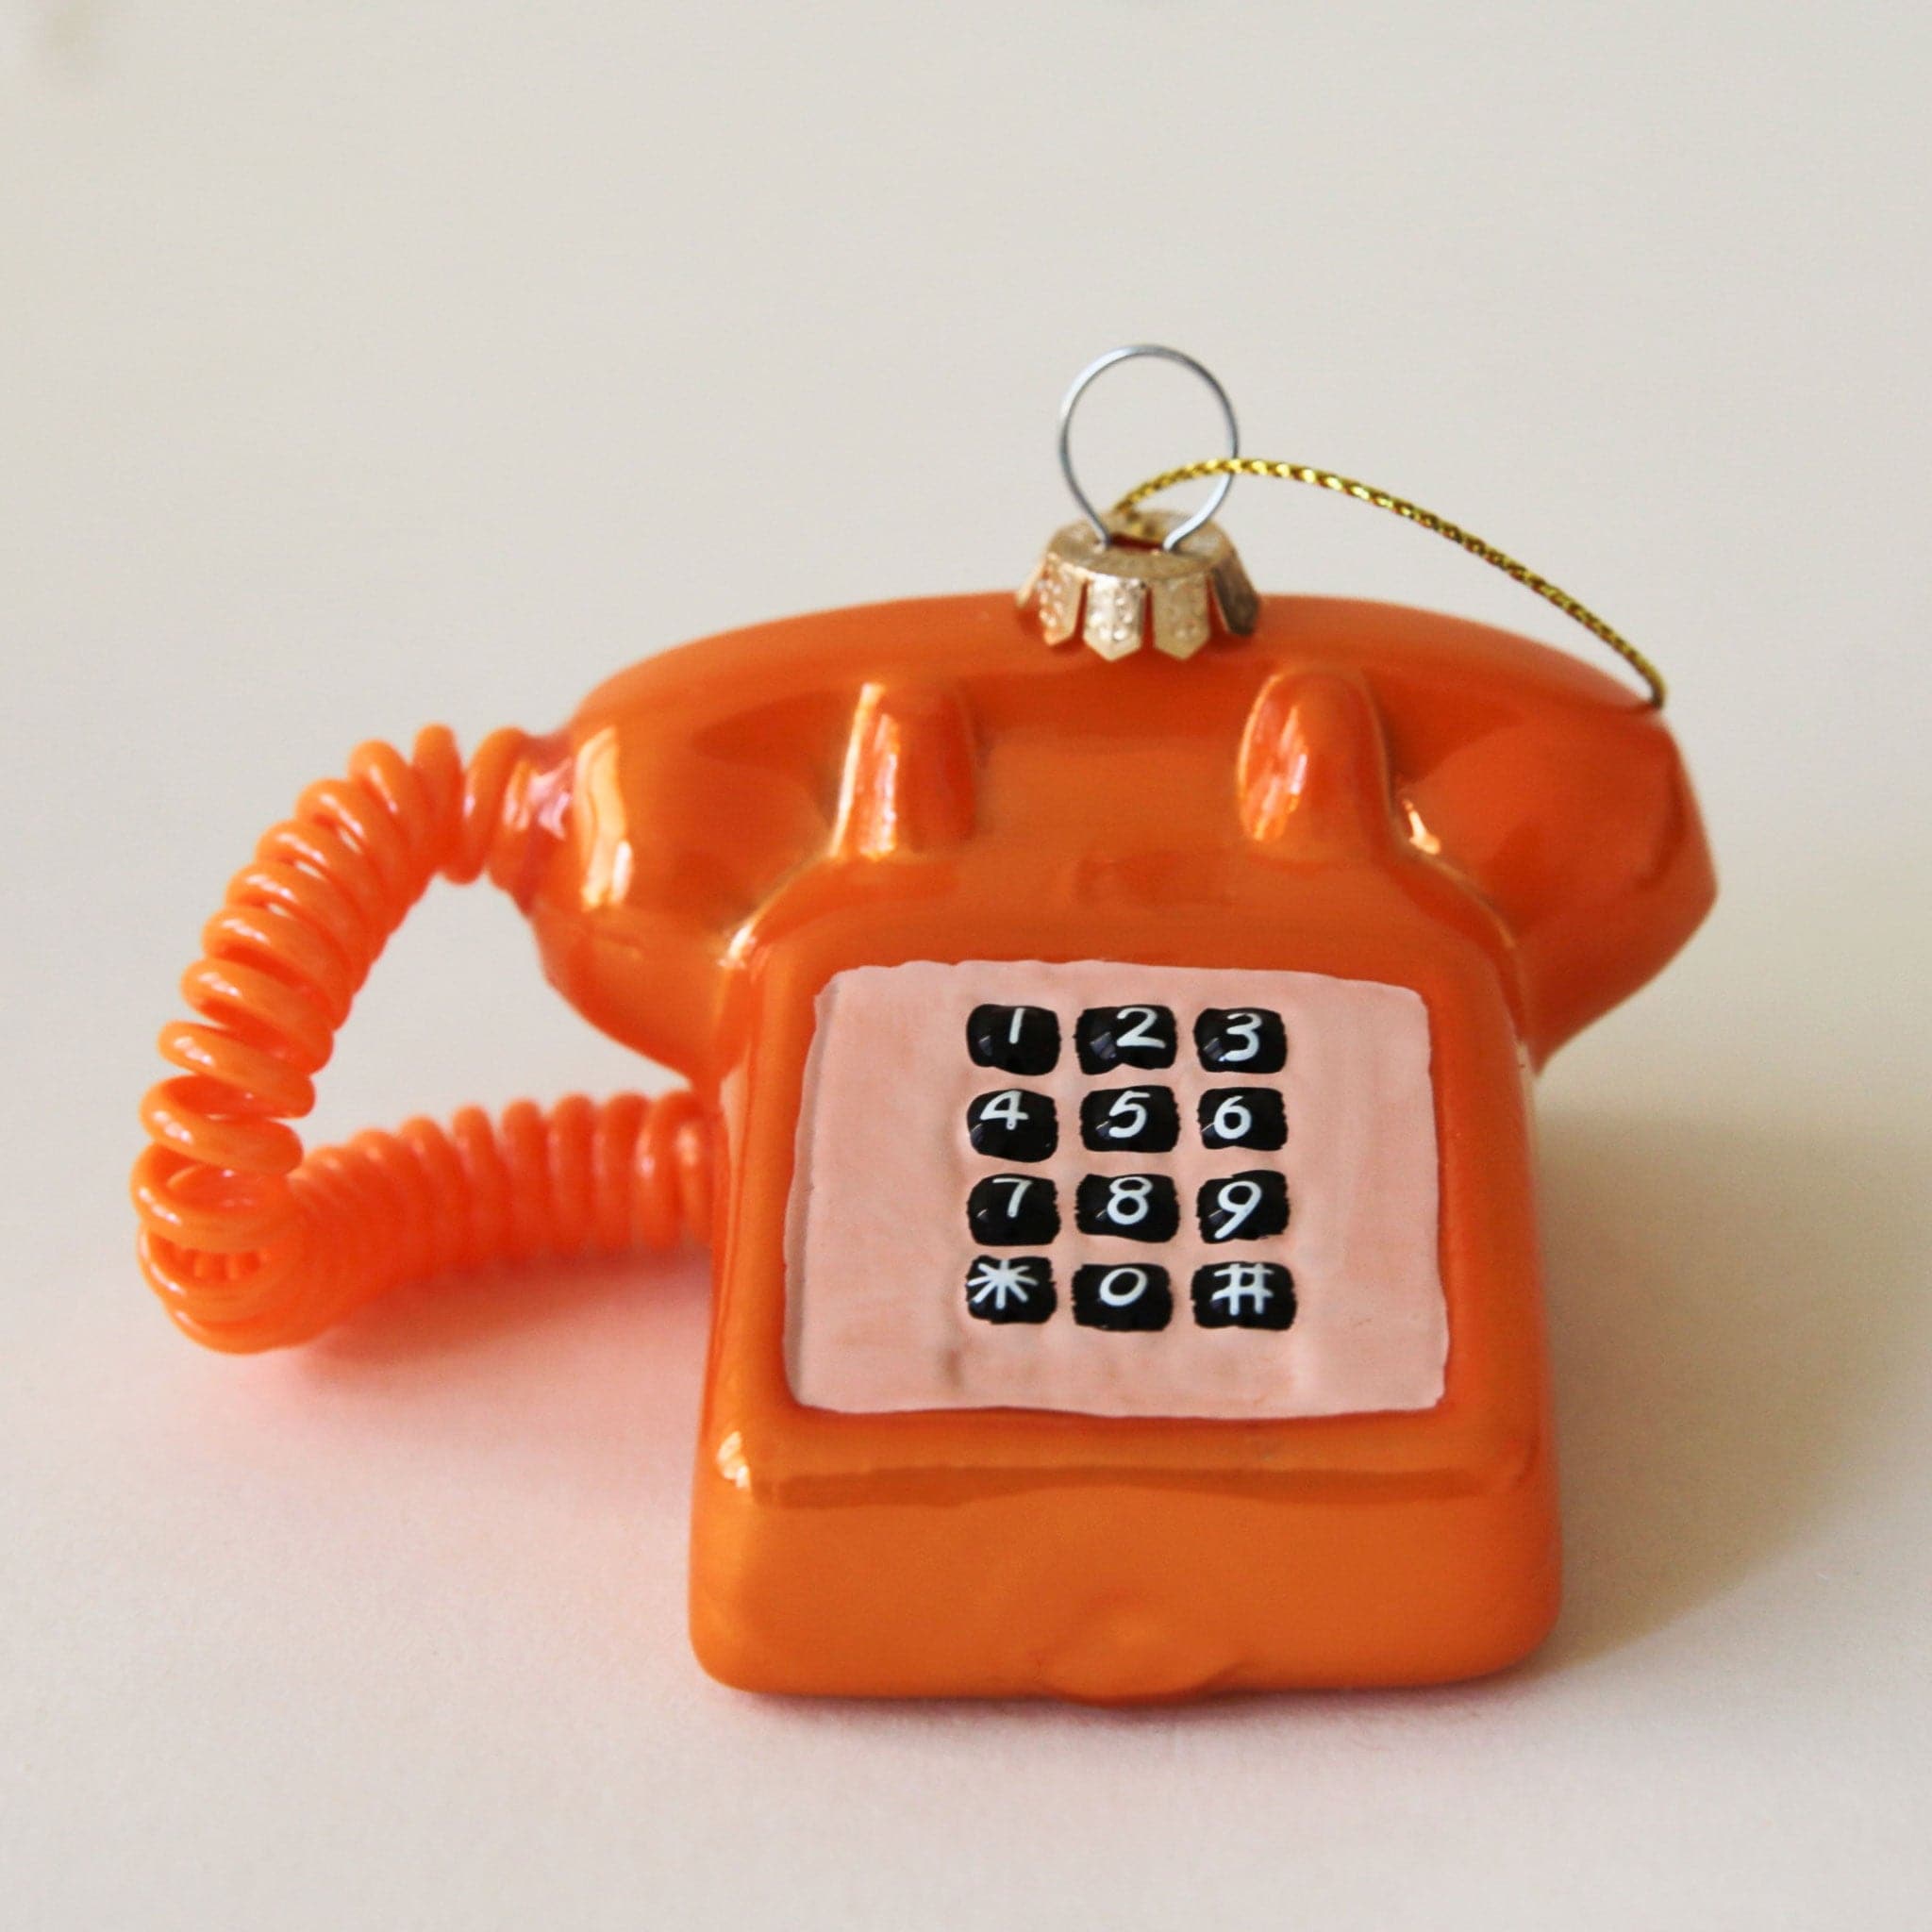 A touch tone phone ornament in a shiny orange color.